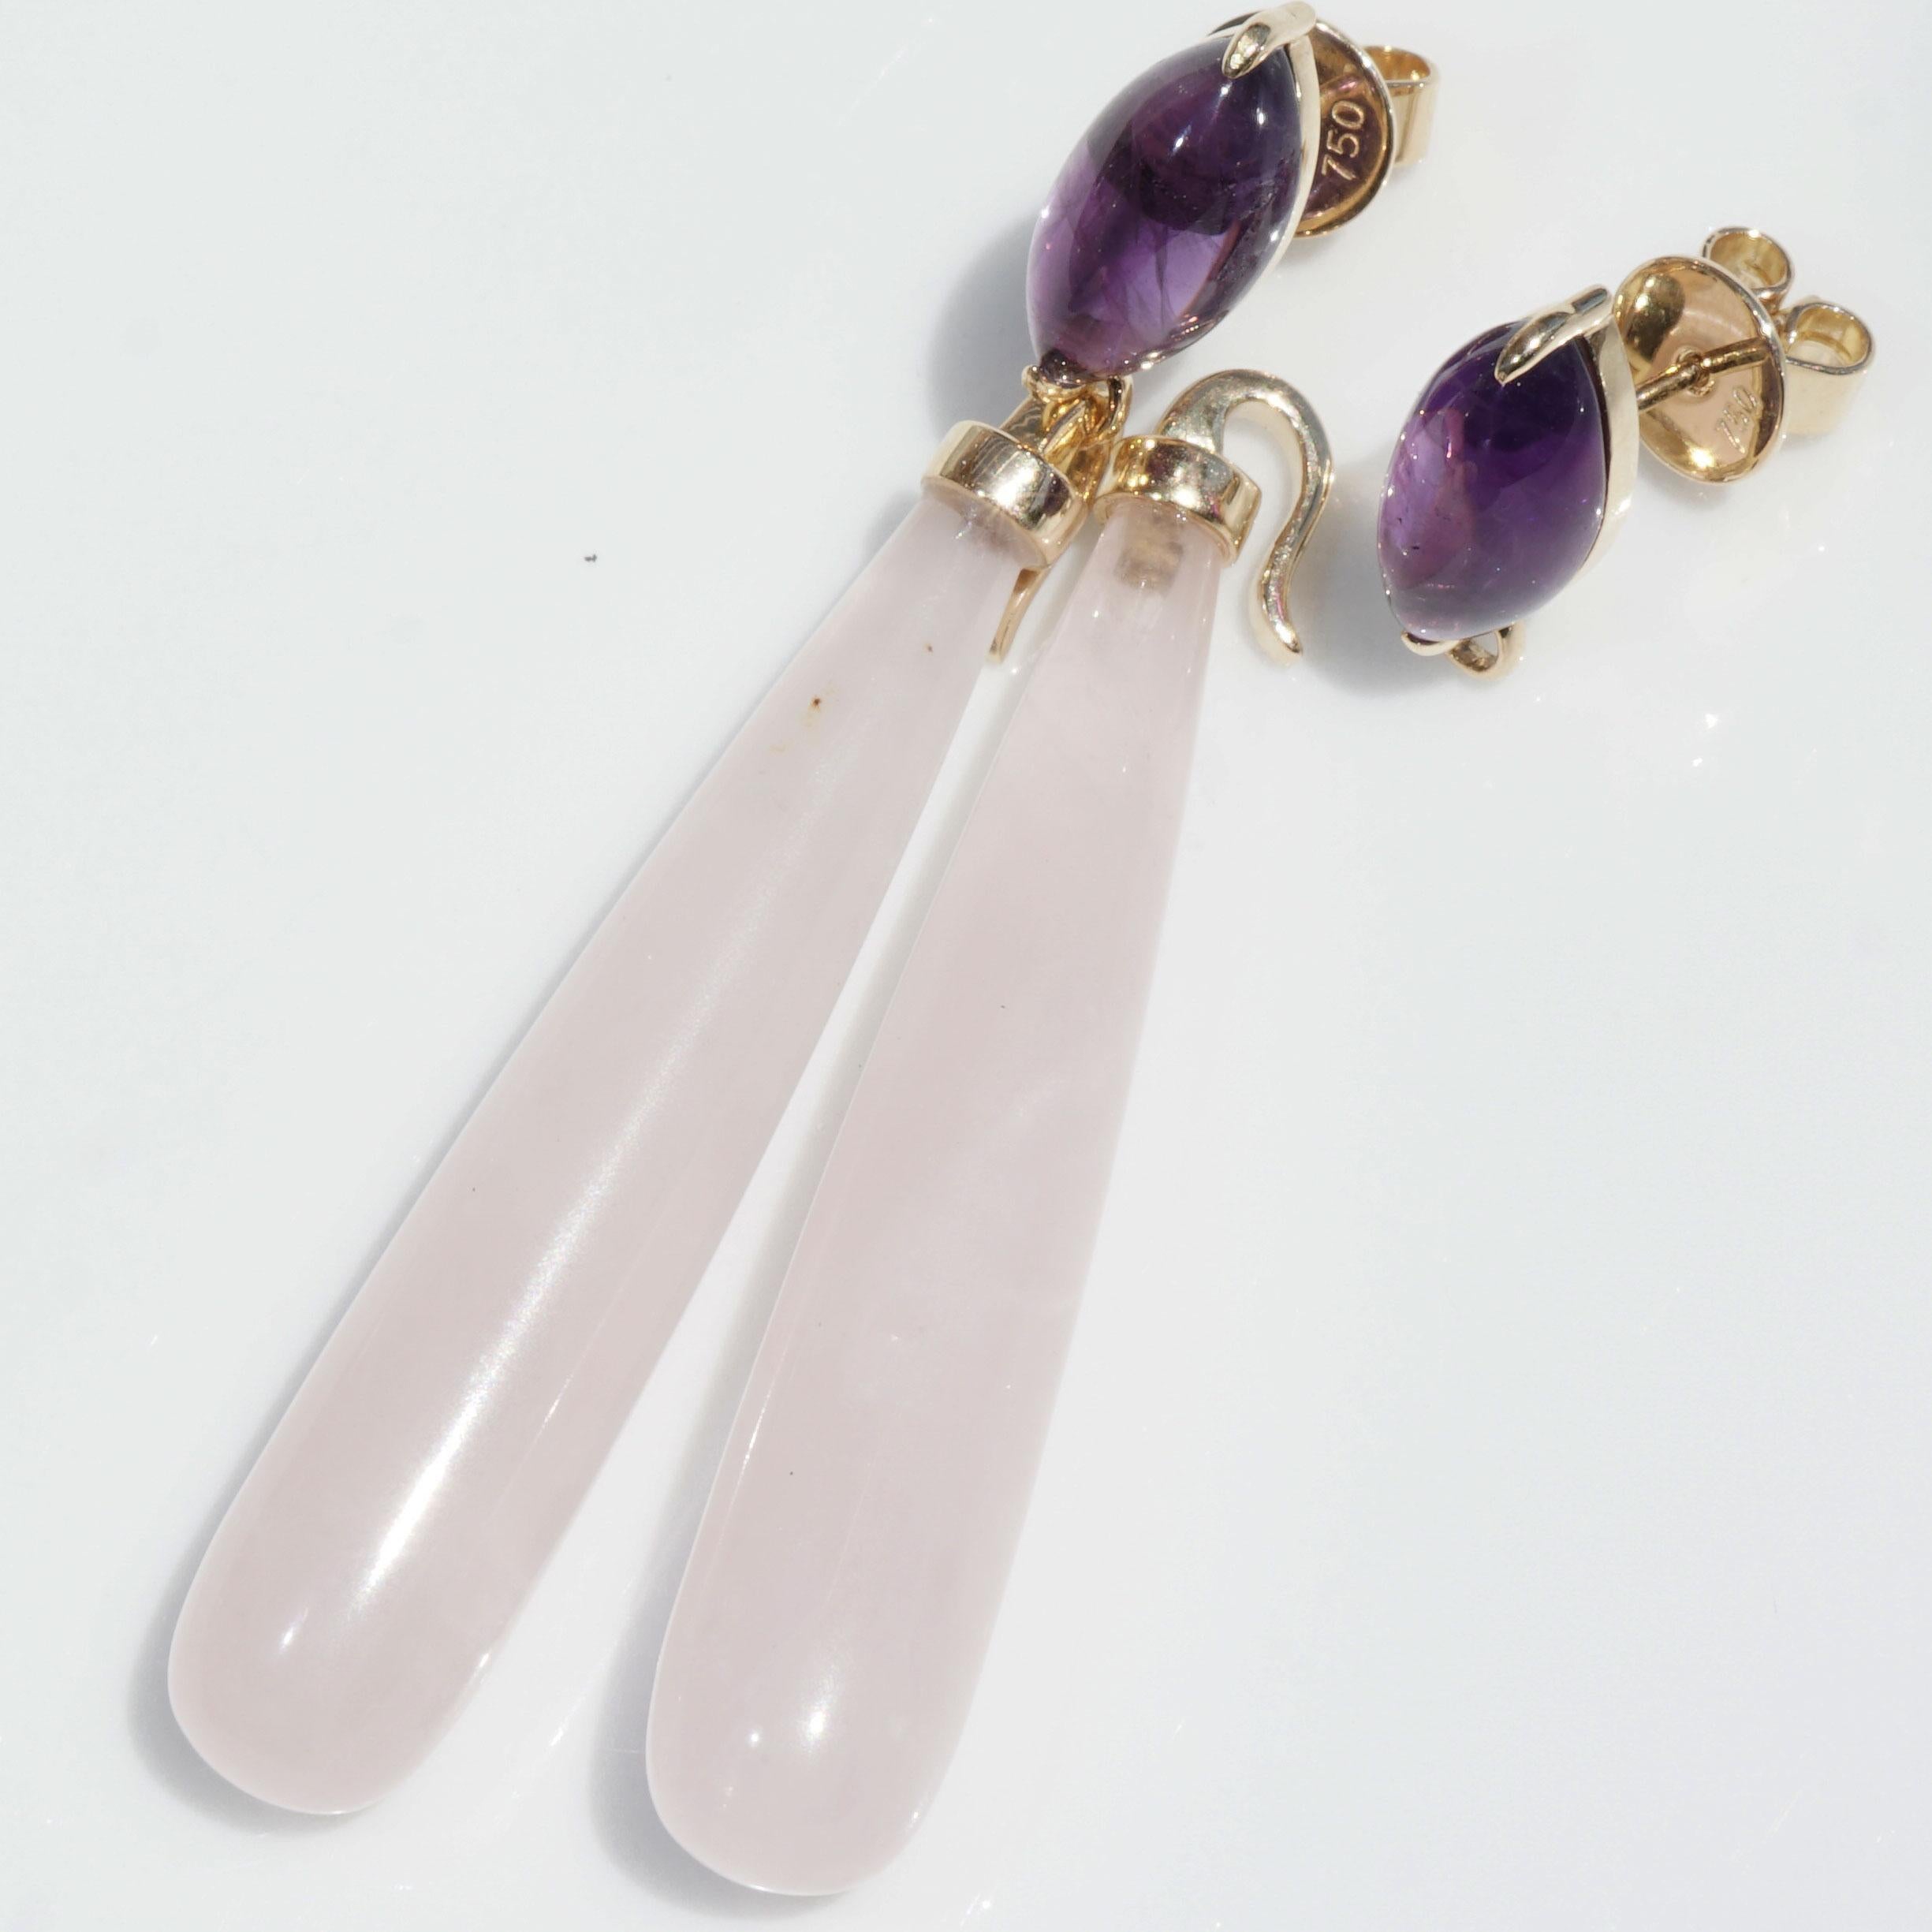 exquisite gemstones with great color combinations, inspired by Ole Lynggard who design great ear jewelry, pink rose quartz pampels in beautiful quality total ca. 37.25 ct, AAA, in addition as a colorful contrast shining violet amethyst navette